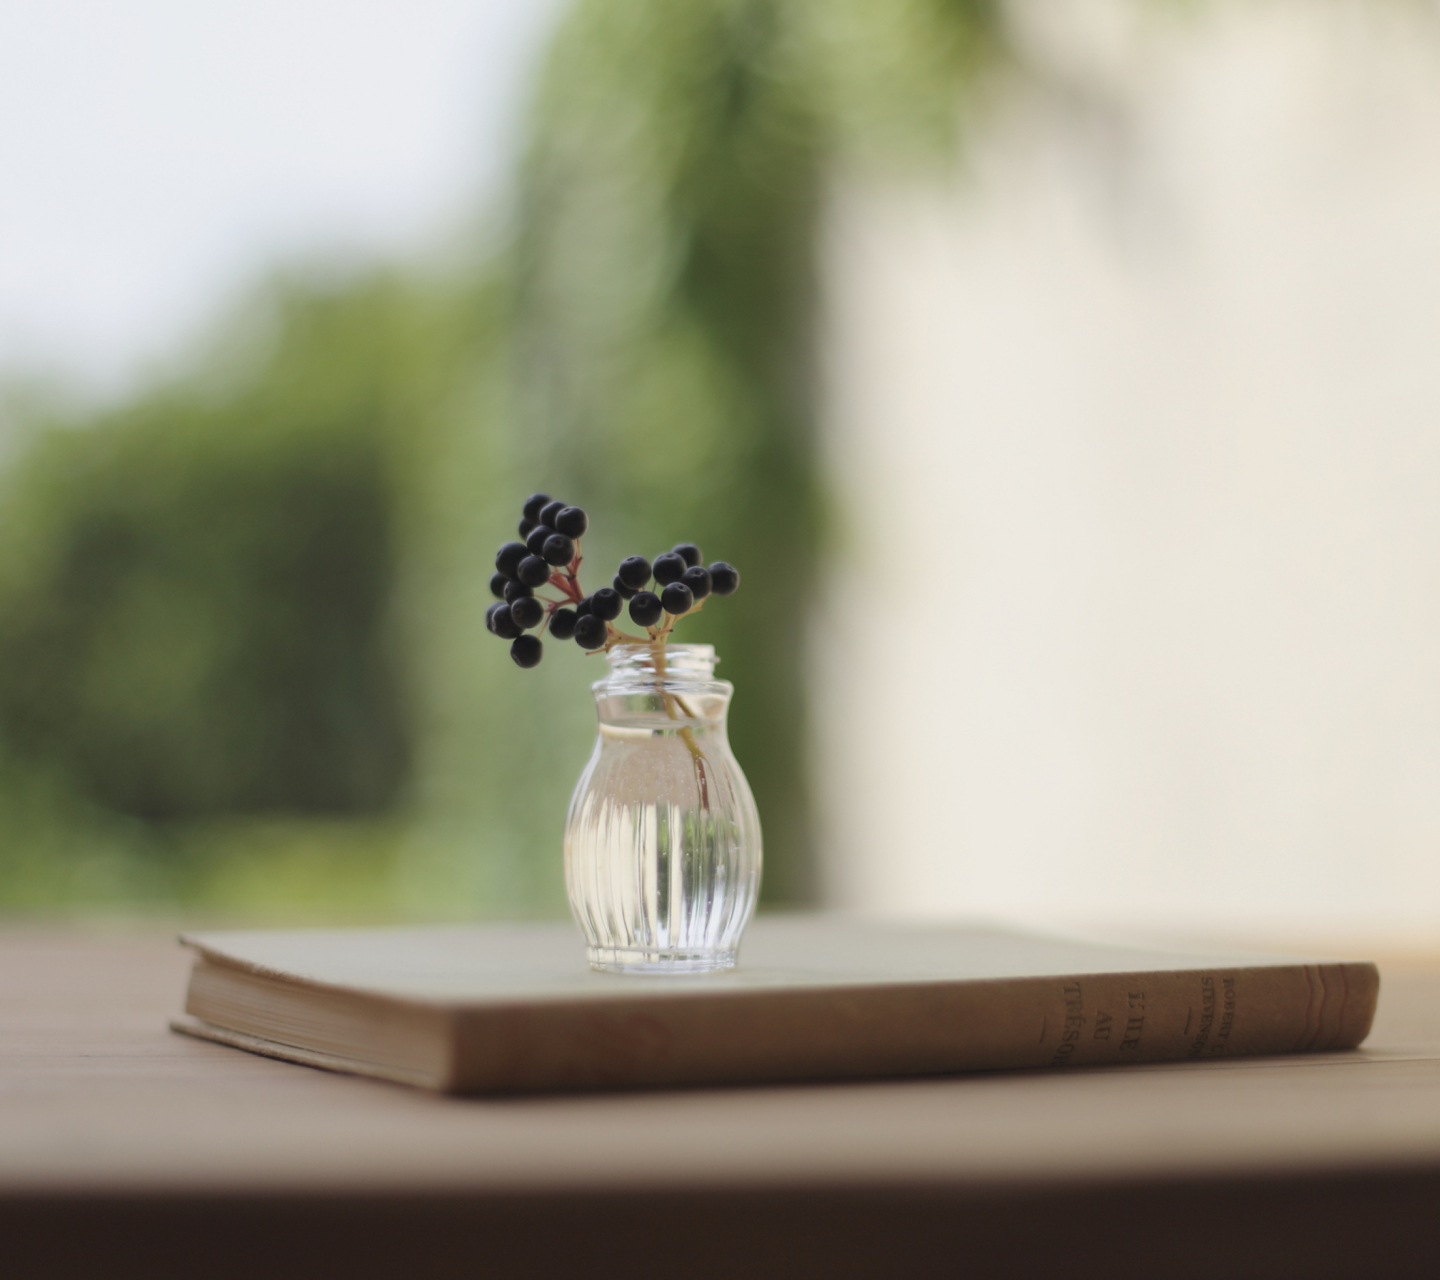 Little Vase And Berry Branch wallpaper 1440x1280